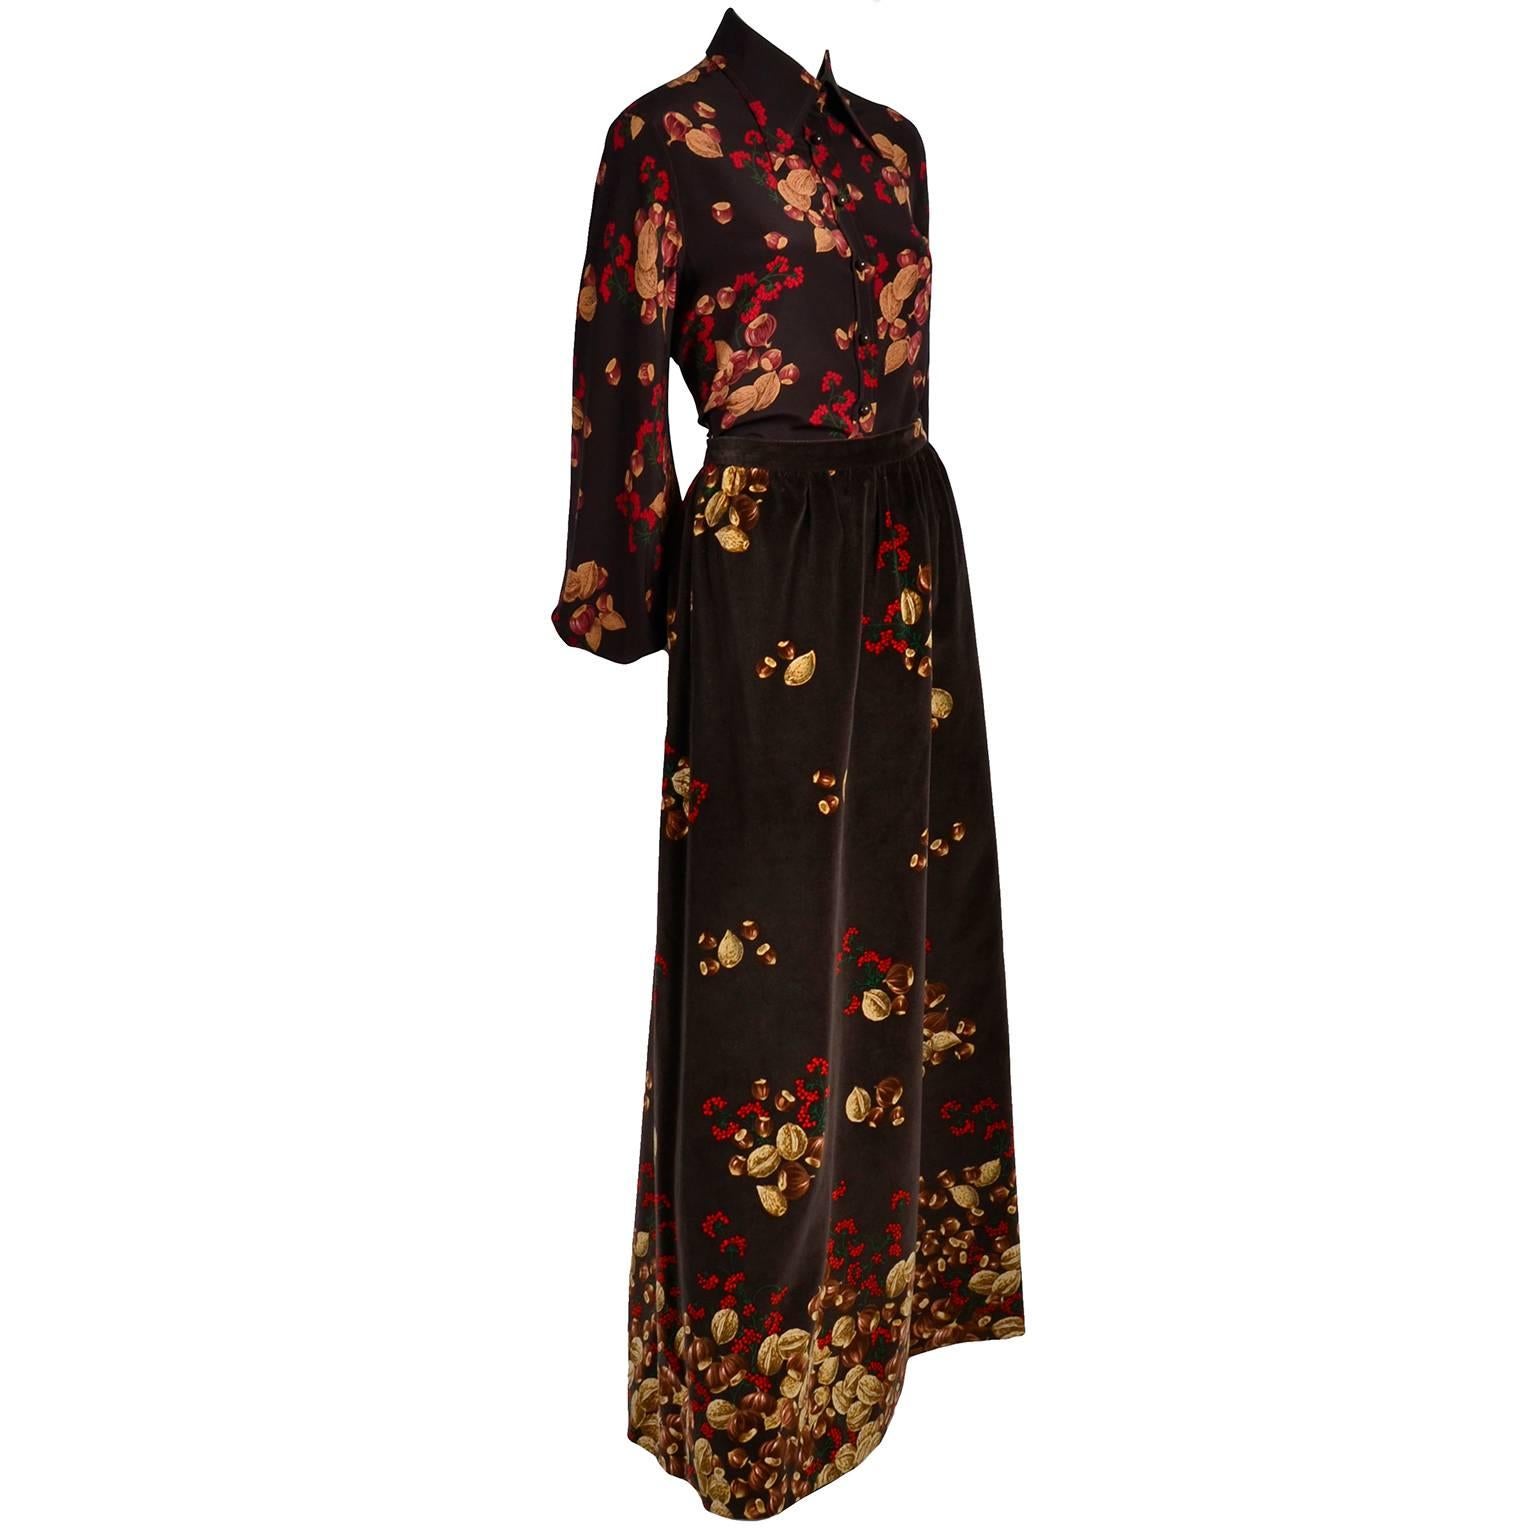 This is a beautiful 1970's Valentino outfit in an iconic acorn and red berry print with a silk blouse and a matching velvet maxi skirt by Valentino Boutique. The fully lined skirt is made of beautiful brown cotton velvet with subtle gathering at the